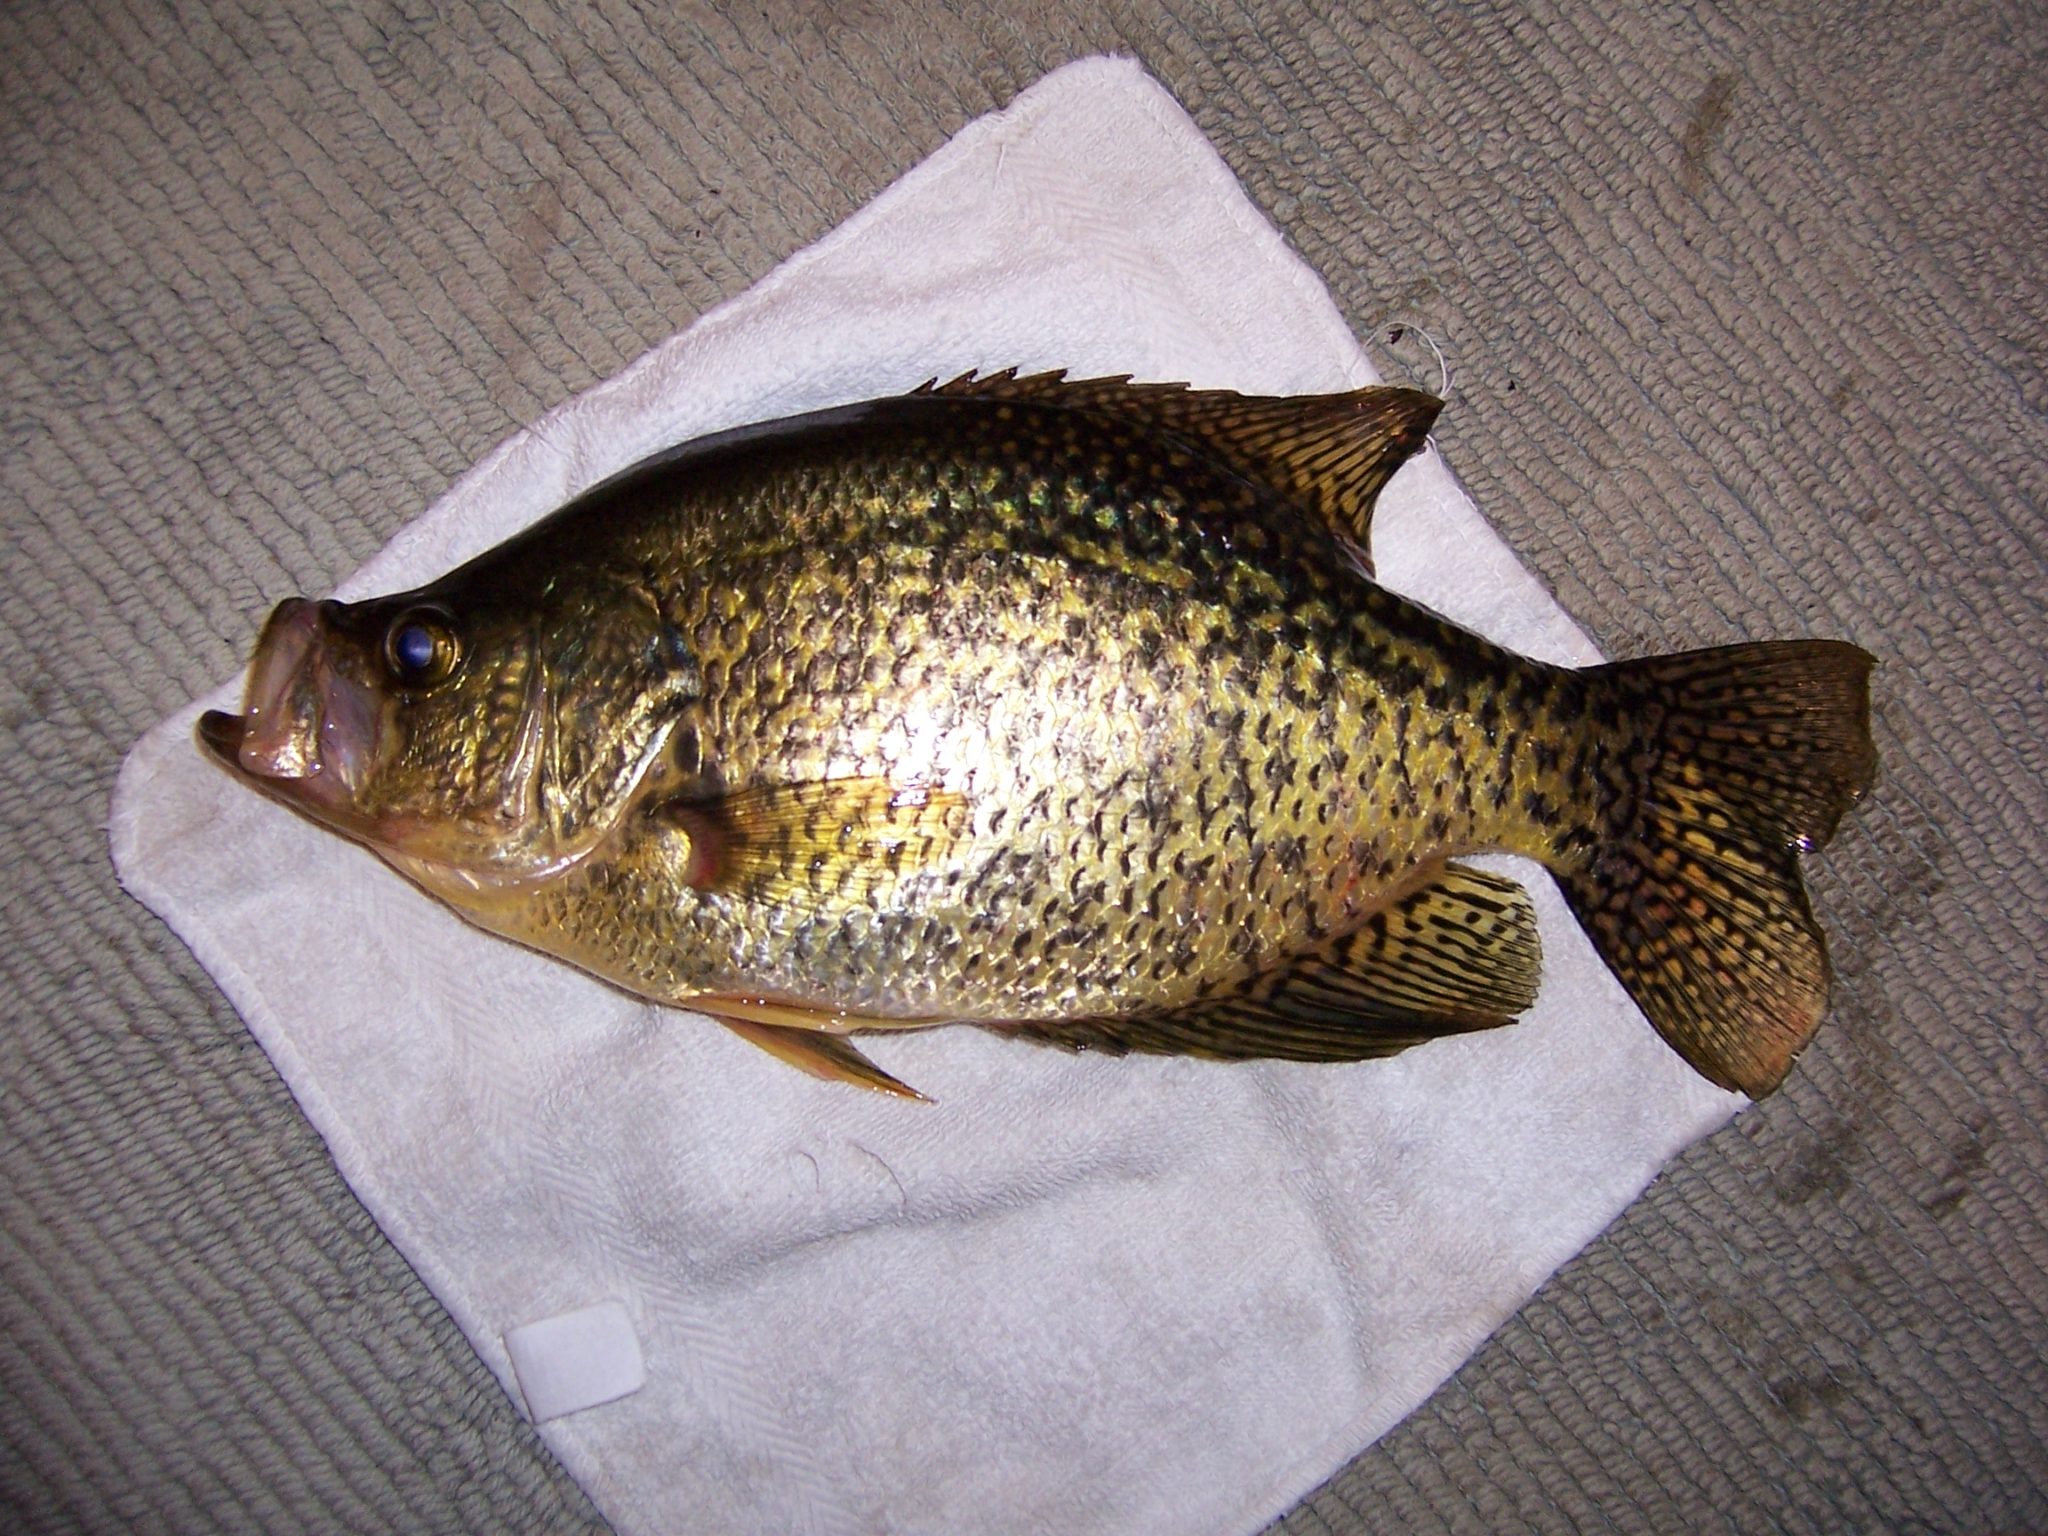 Spring is time for Crappie fishing and adding new fish habitat